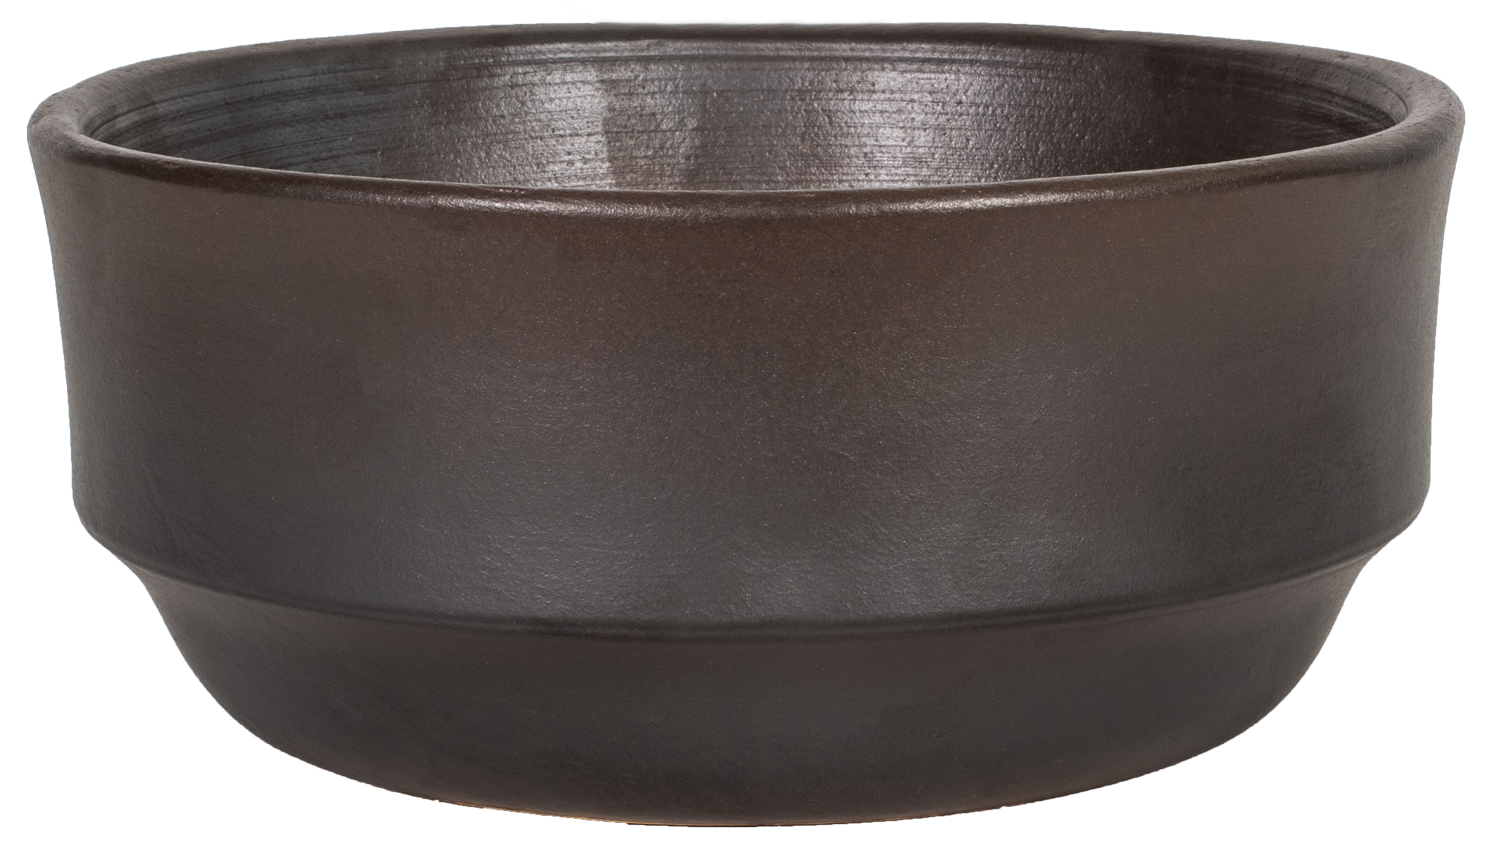 Large rounded bowl planter in brown glaze